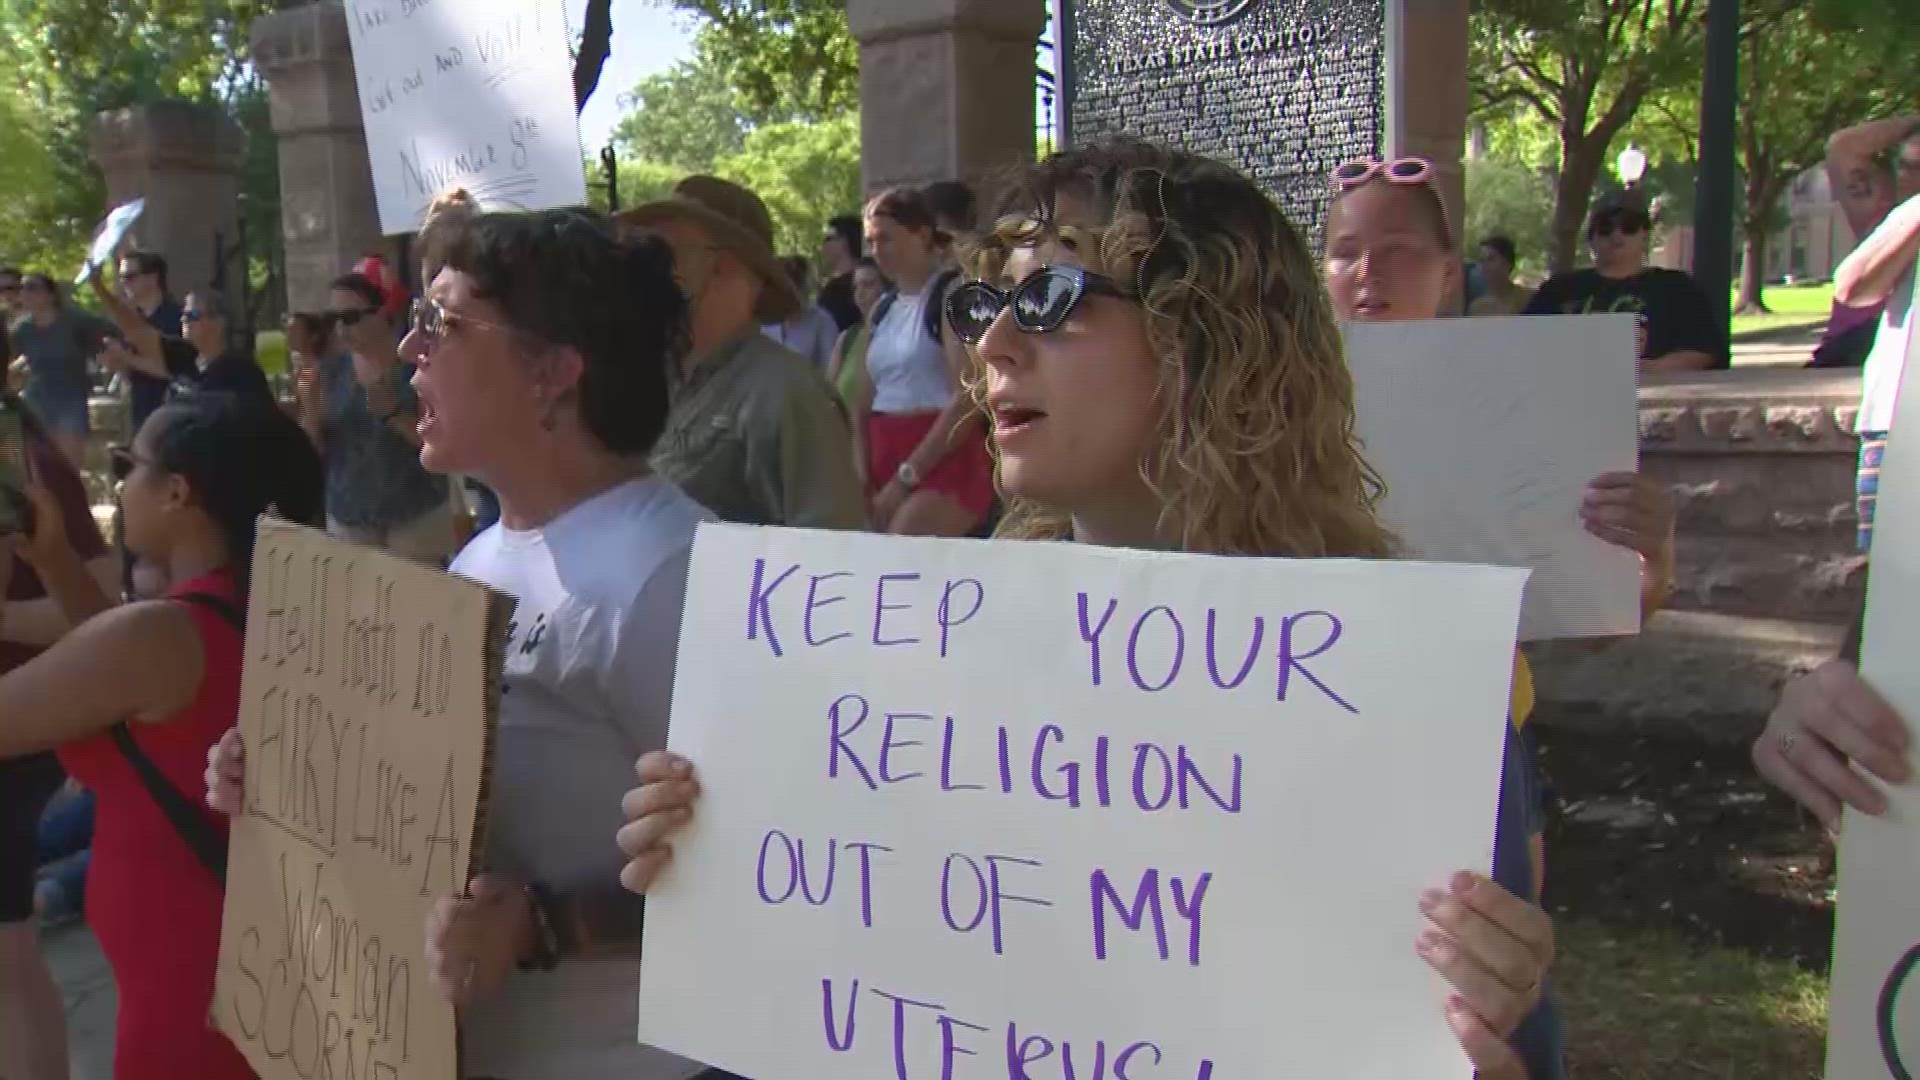 Protesters rallied and marched in Downtown Austin on Friday in support of abortion rights after the Supreme Court's decision to overturn Roe v. Wade.